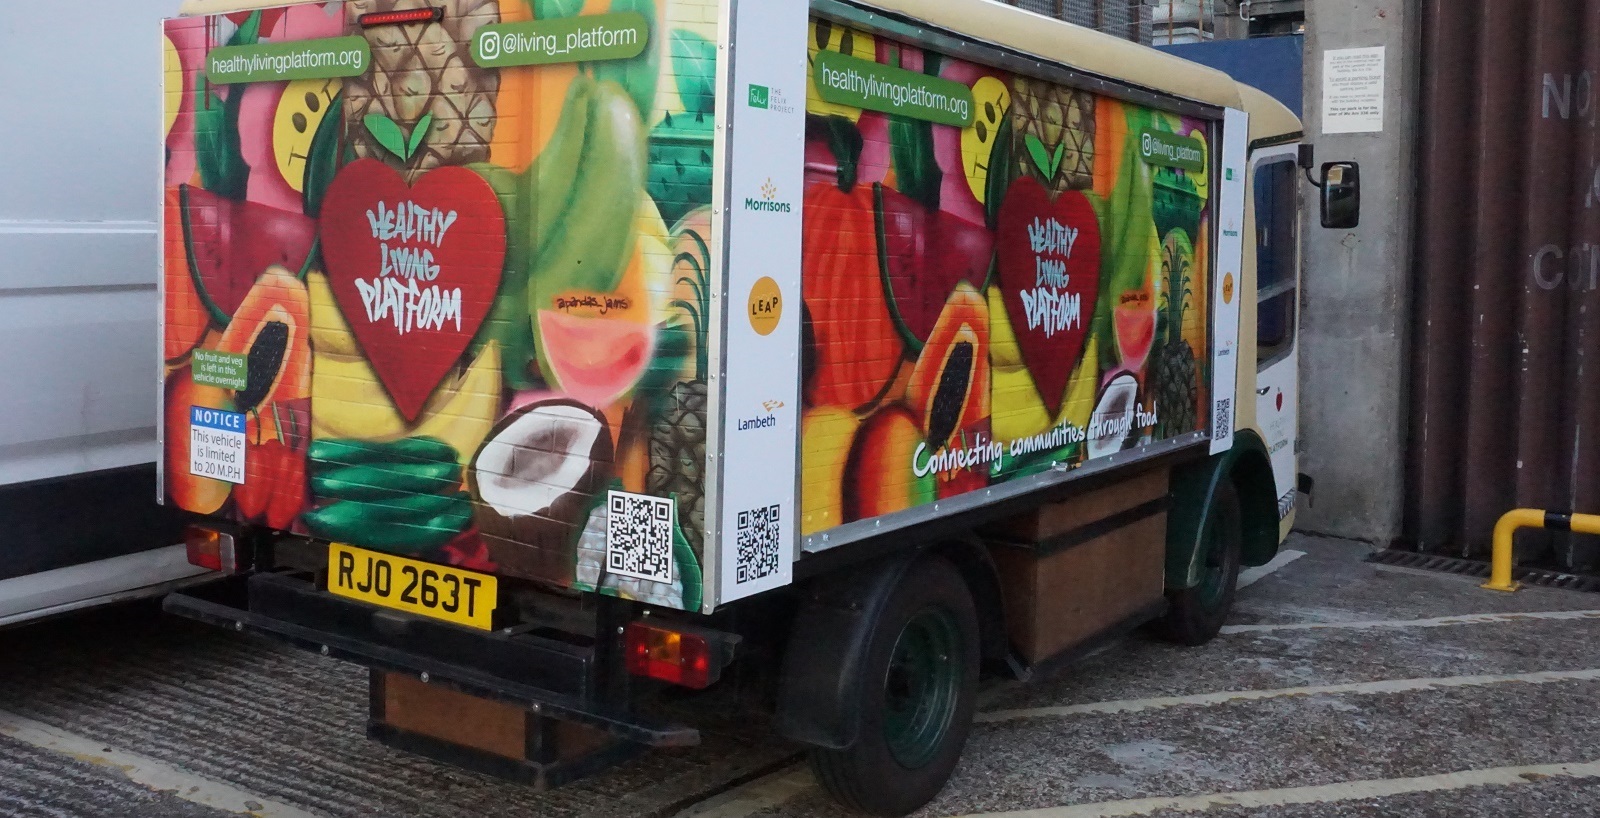 Healthy Living Platform's milk float with design of fruit and vegetables matching the mural in the Surplus Food Hub